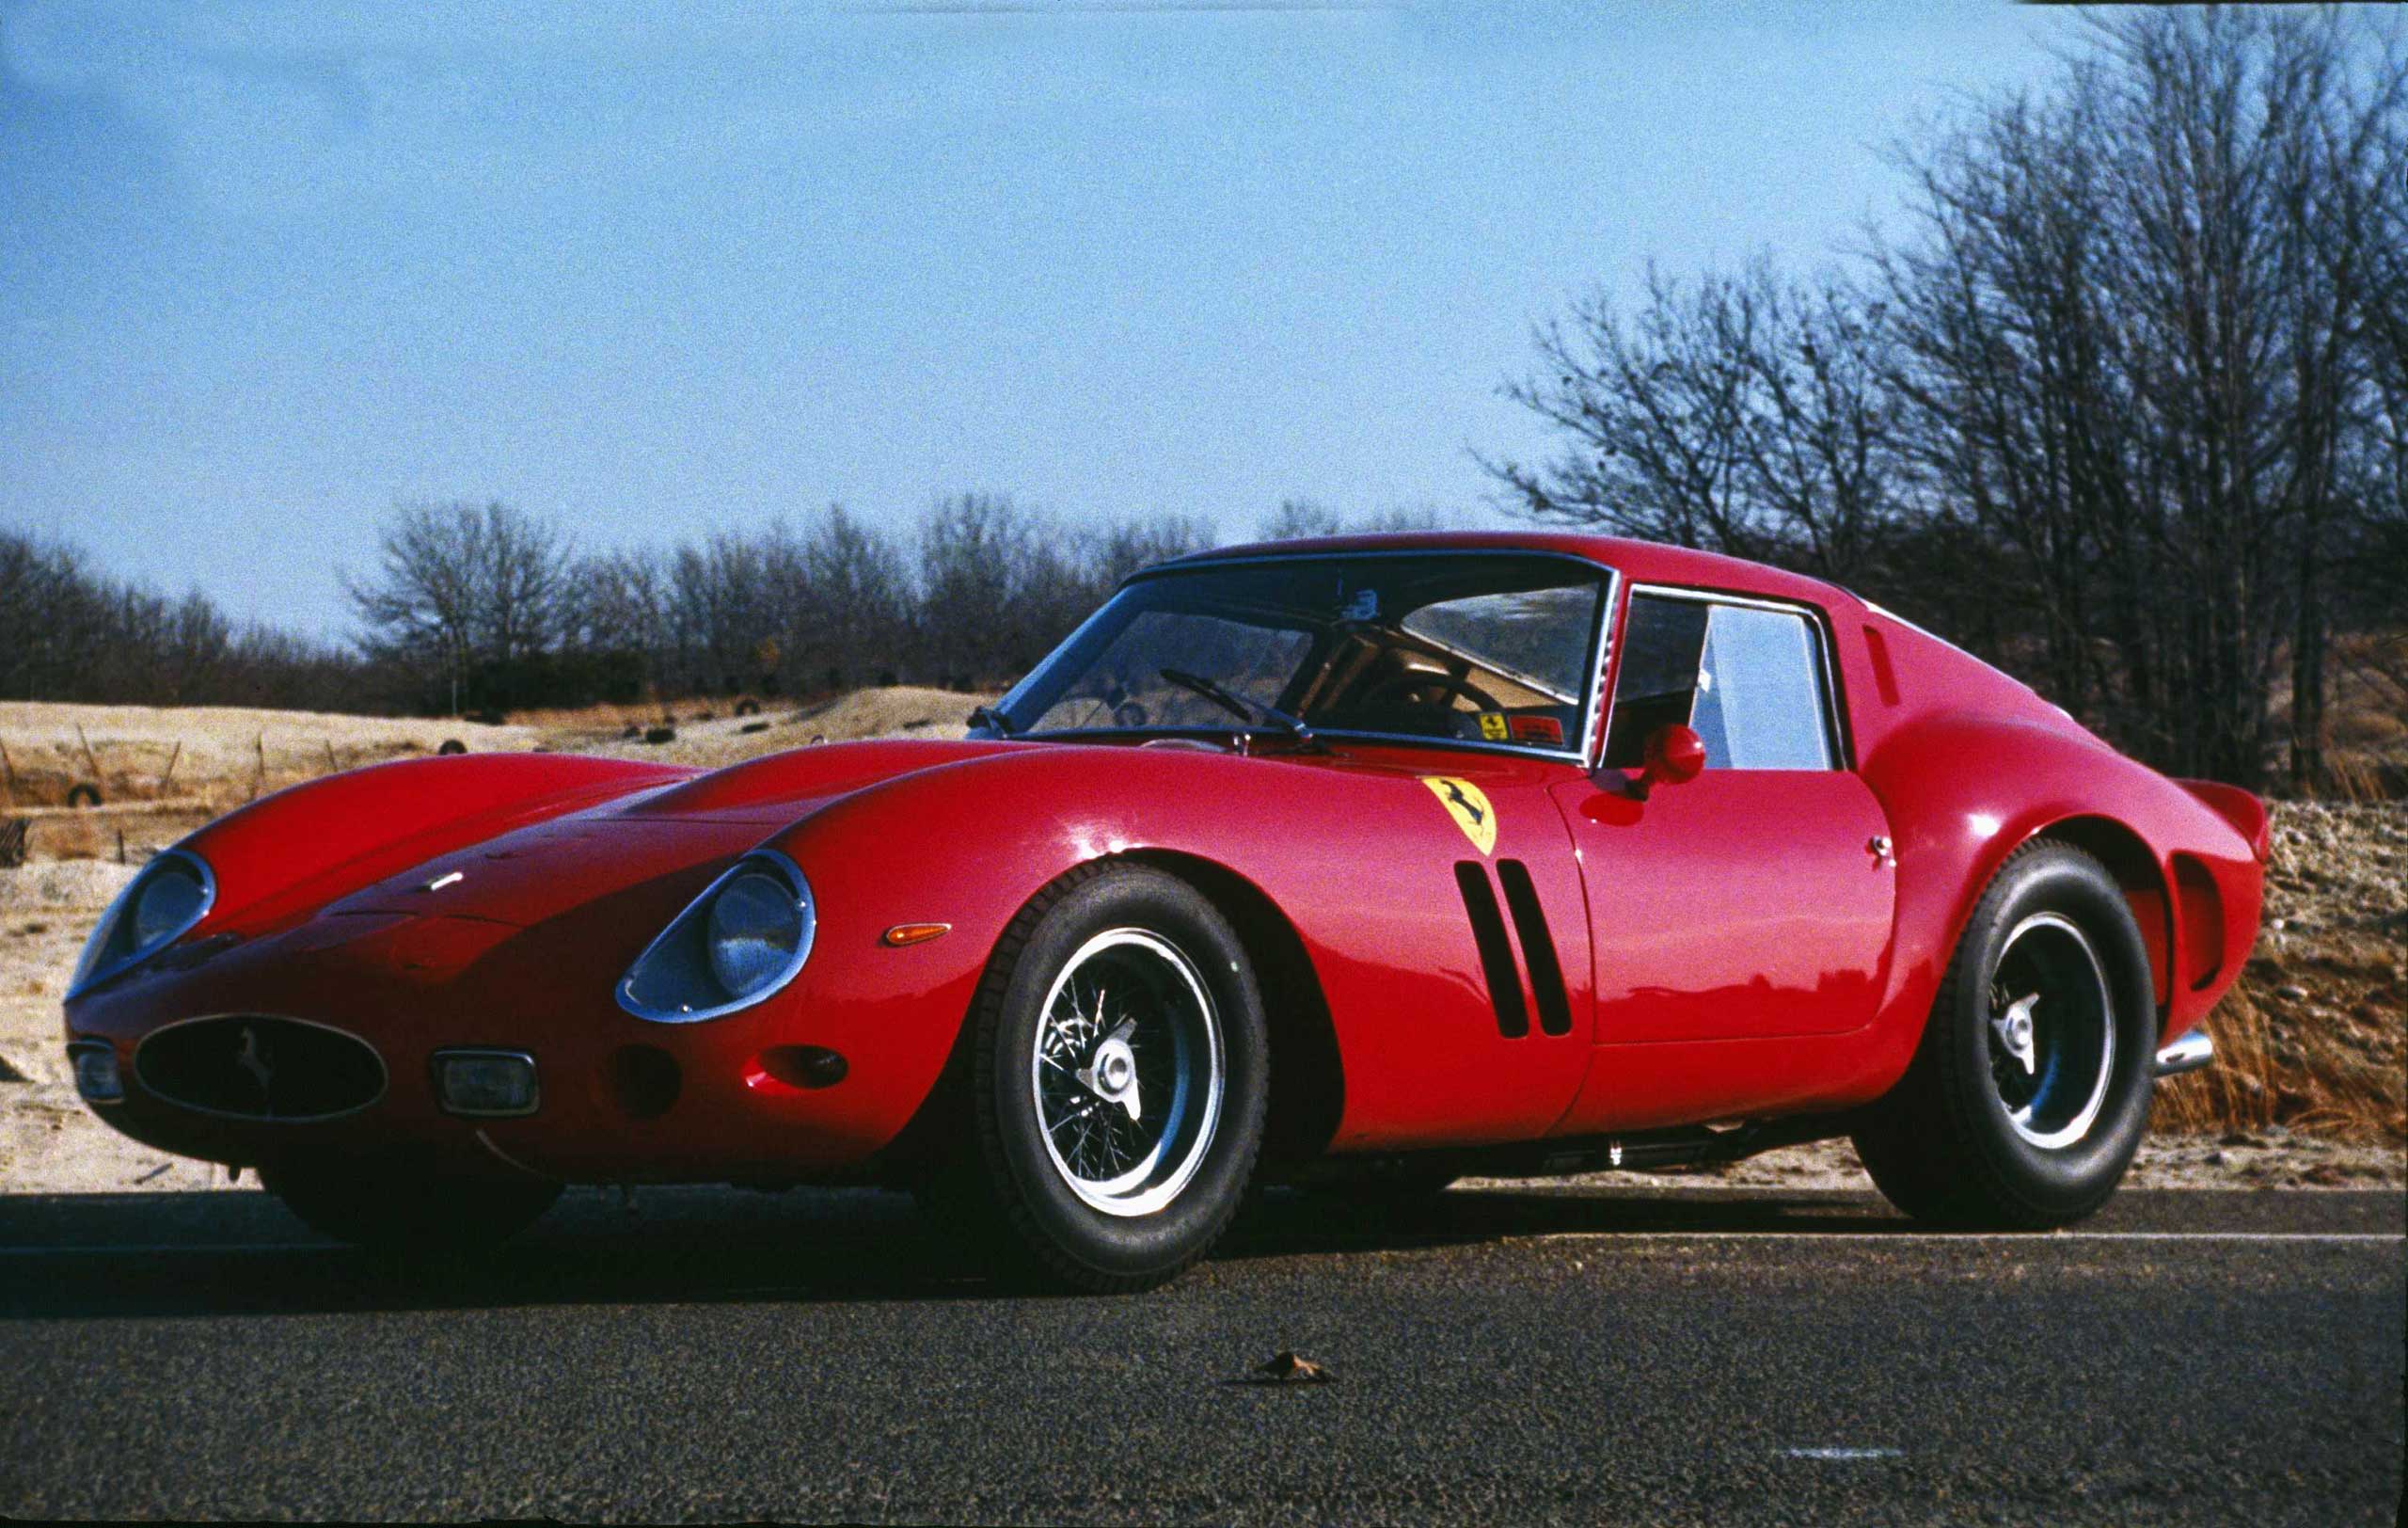 1962-64: The 250 GTO was the only front-engine model on display at the 1962 pre-season Ferrari press conference.